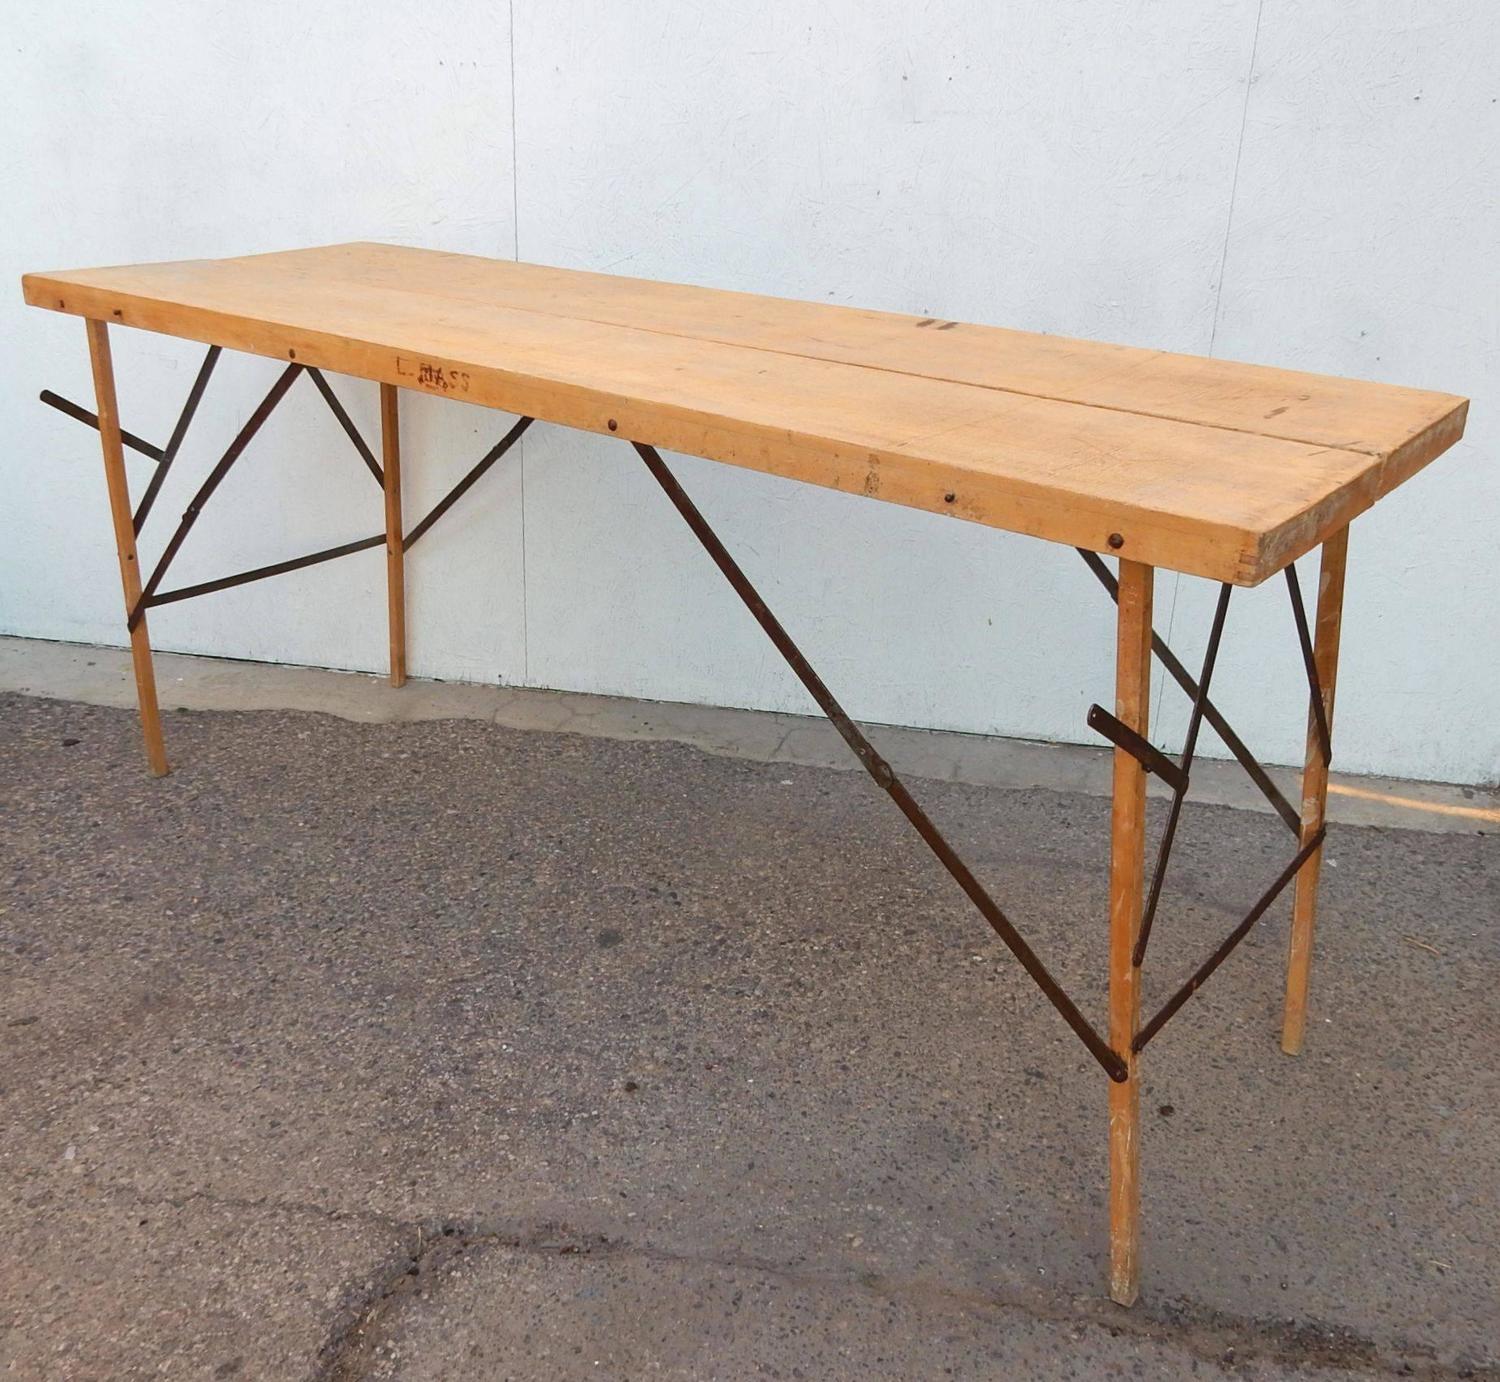 1930s Industrial Wallpaper Hangers Folding Table Or Desk At